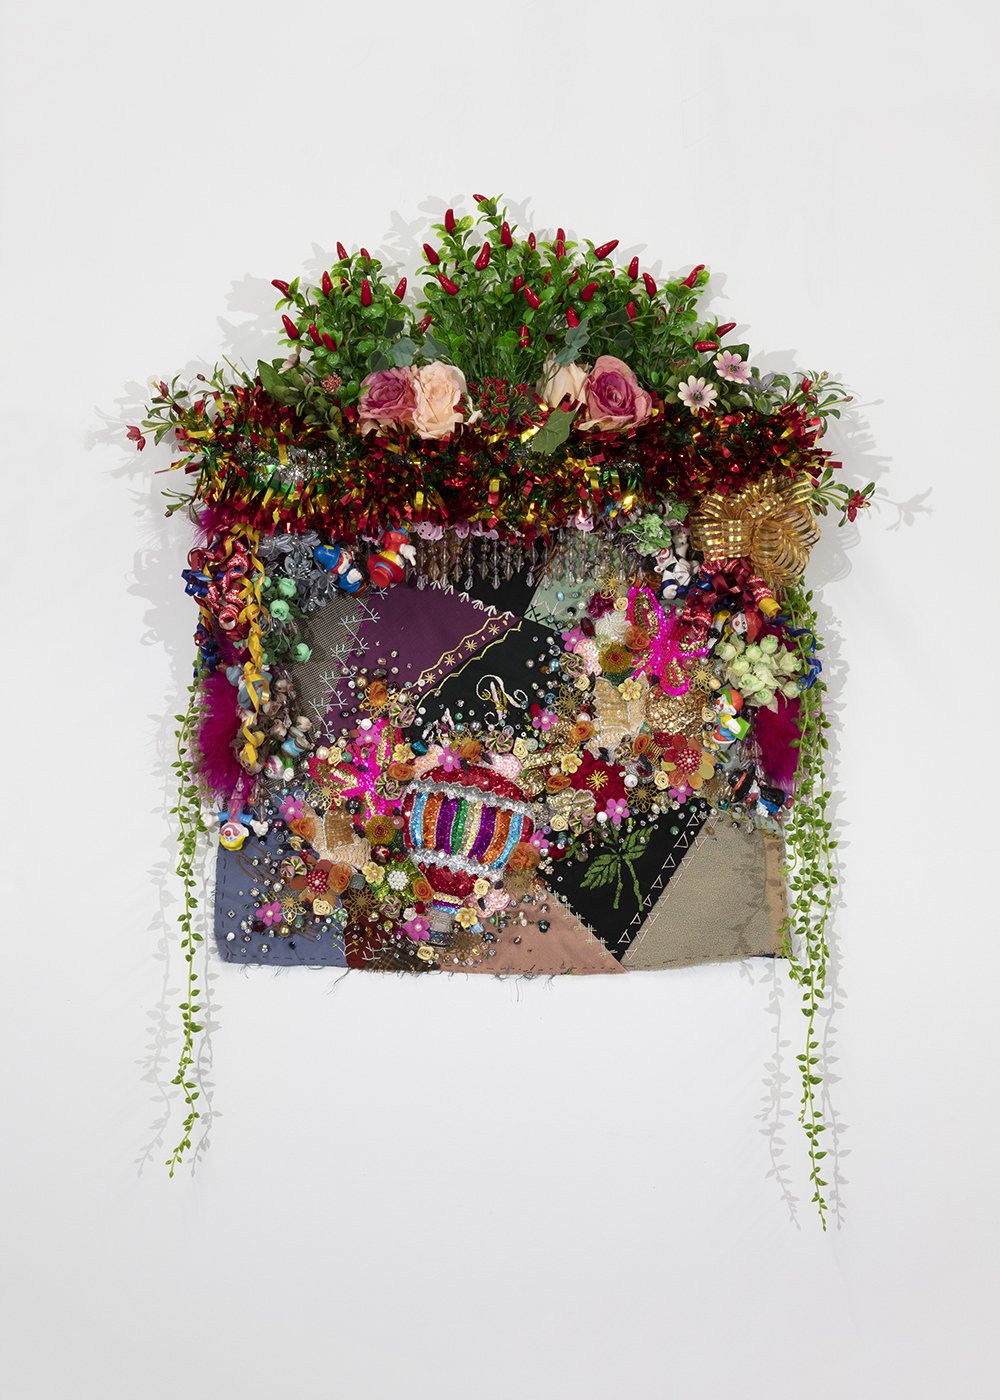   Shroud #4 (study),  2022, Found ‘Crazy’ quilt ca. 1900, trim, fabric flowers, garland, toys, costume jewelry, buttons, plastic flowers and fauna, beads, sequins, thread, fabric, pine, 36 x 26 x 6” 